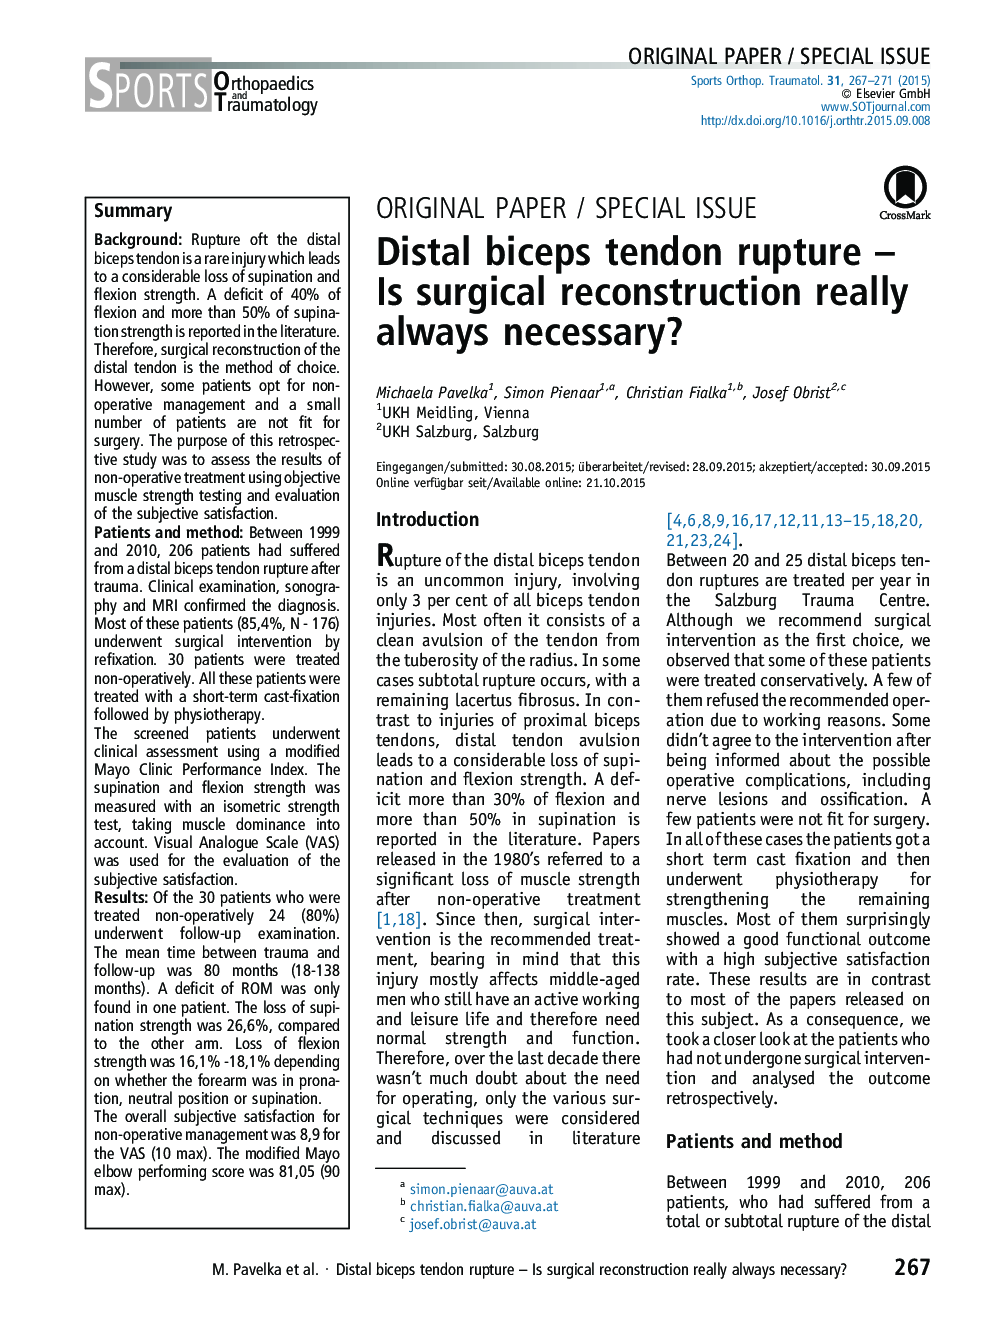 Distal biceps tendon rupture – Is surgical reconstruction really always necessary?